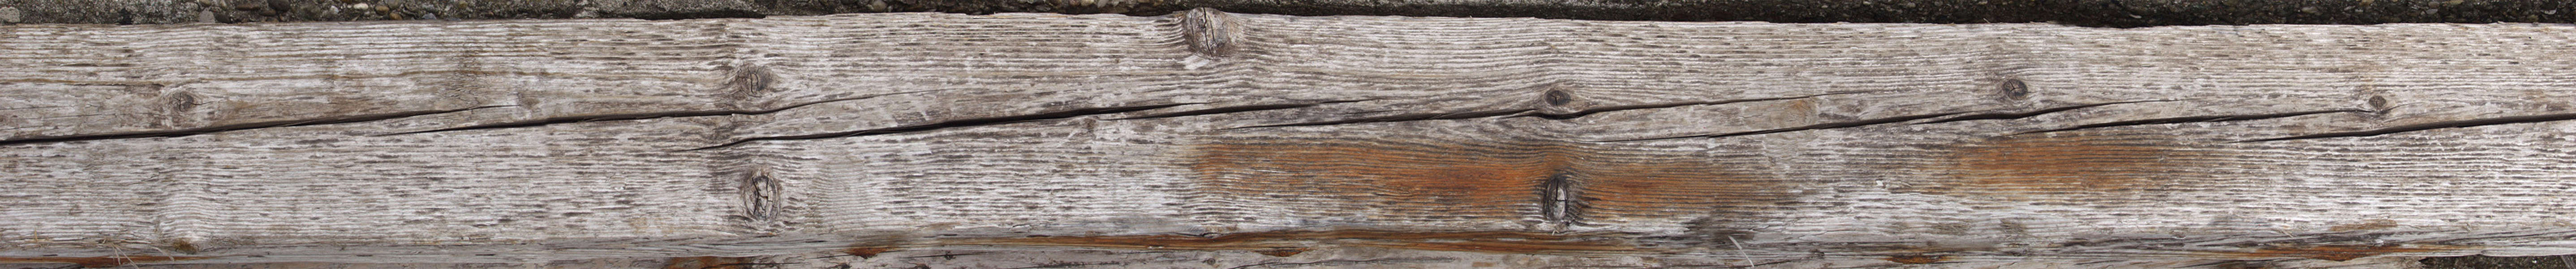 WoodRough0007 - Free Background Texture - wood old rough stains split ...